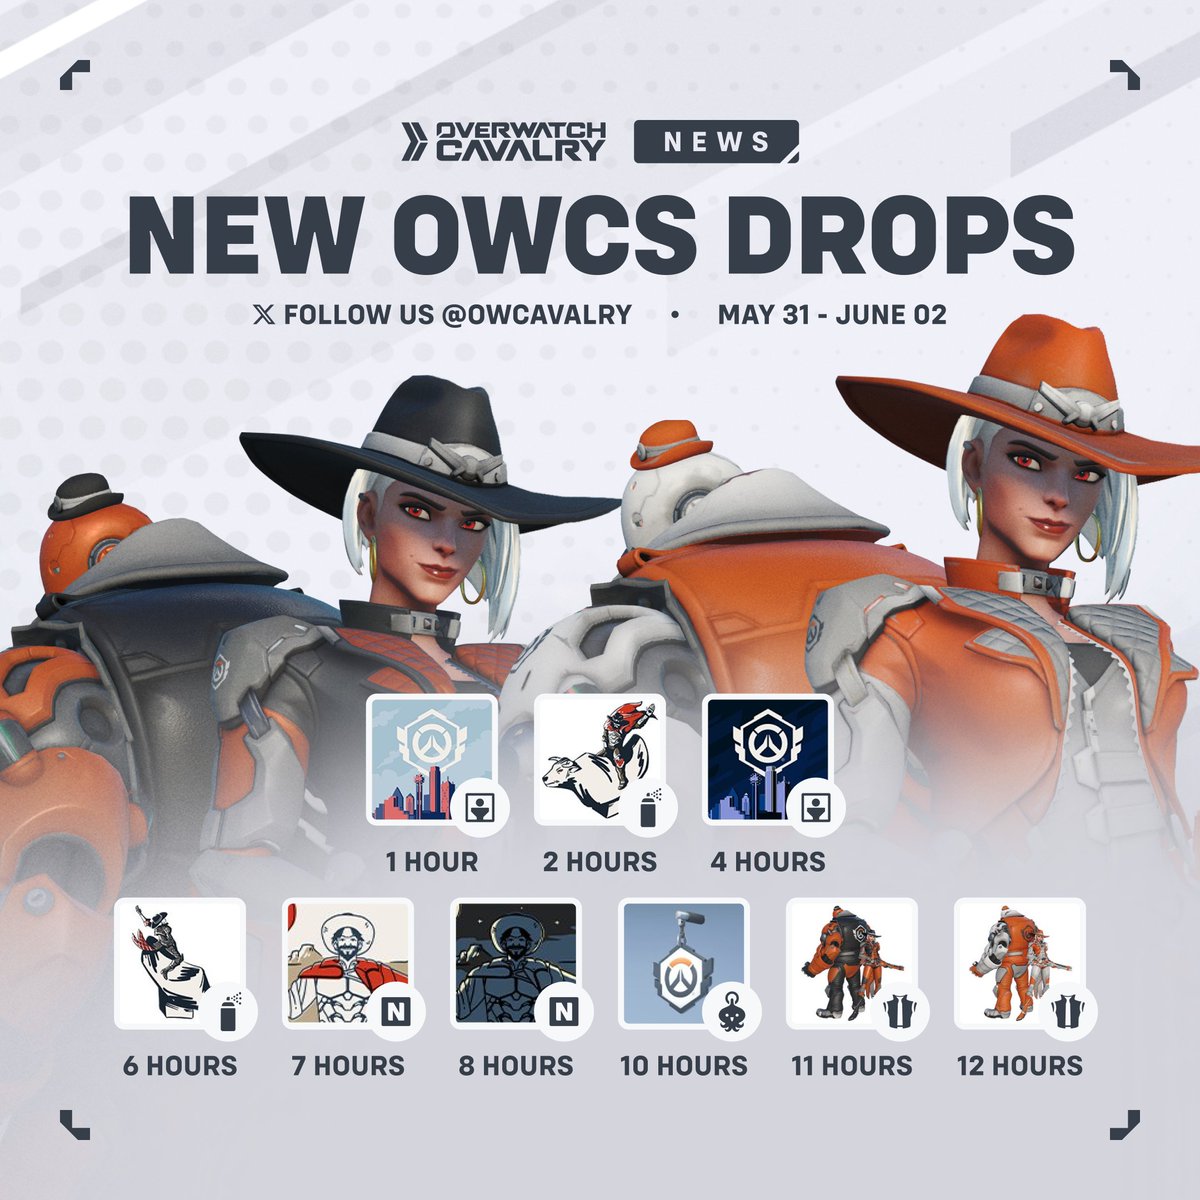 Upcoming OWCS Viewership Rewards for #Overwatch2 ✨ Drops live from May 31 — June 02: 🖼️ 1 Hour: Dallas Major Day Icon 🎨 2 Hours: Rodeo Cassidy Spray 🖼️ 4 Hours: Dallas Major Night Icon 🎨 6 Hours: Rodeo Ashe Spray 🪪 7 Hours: Dallas Noon Namecard 🪪 8 Hours: Dallas Night…